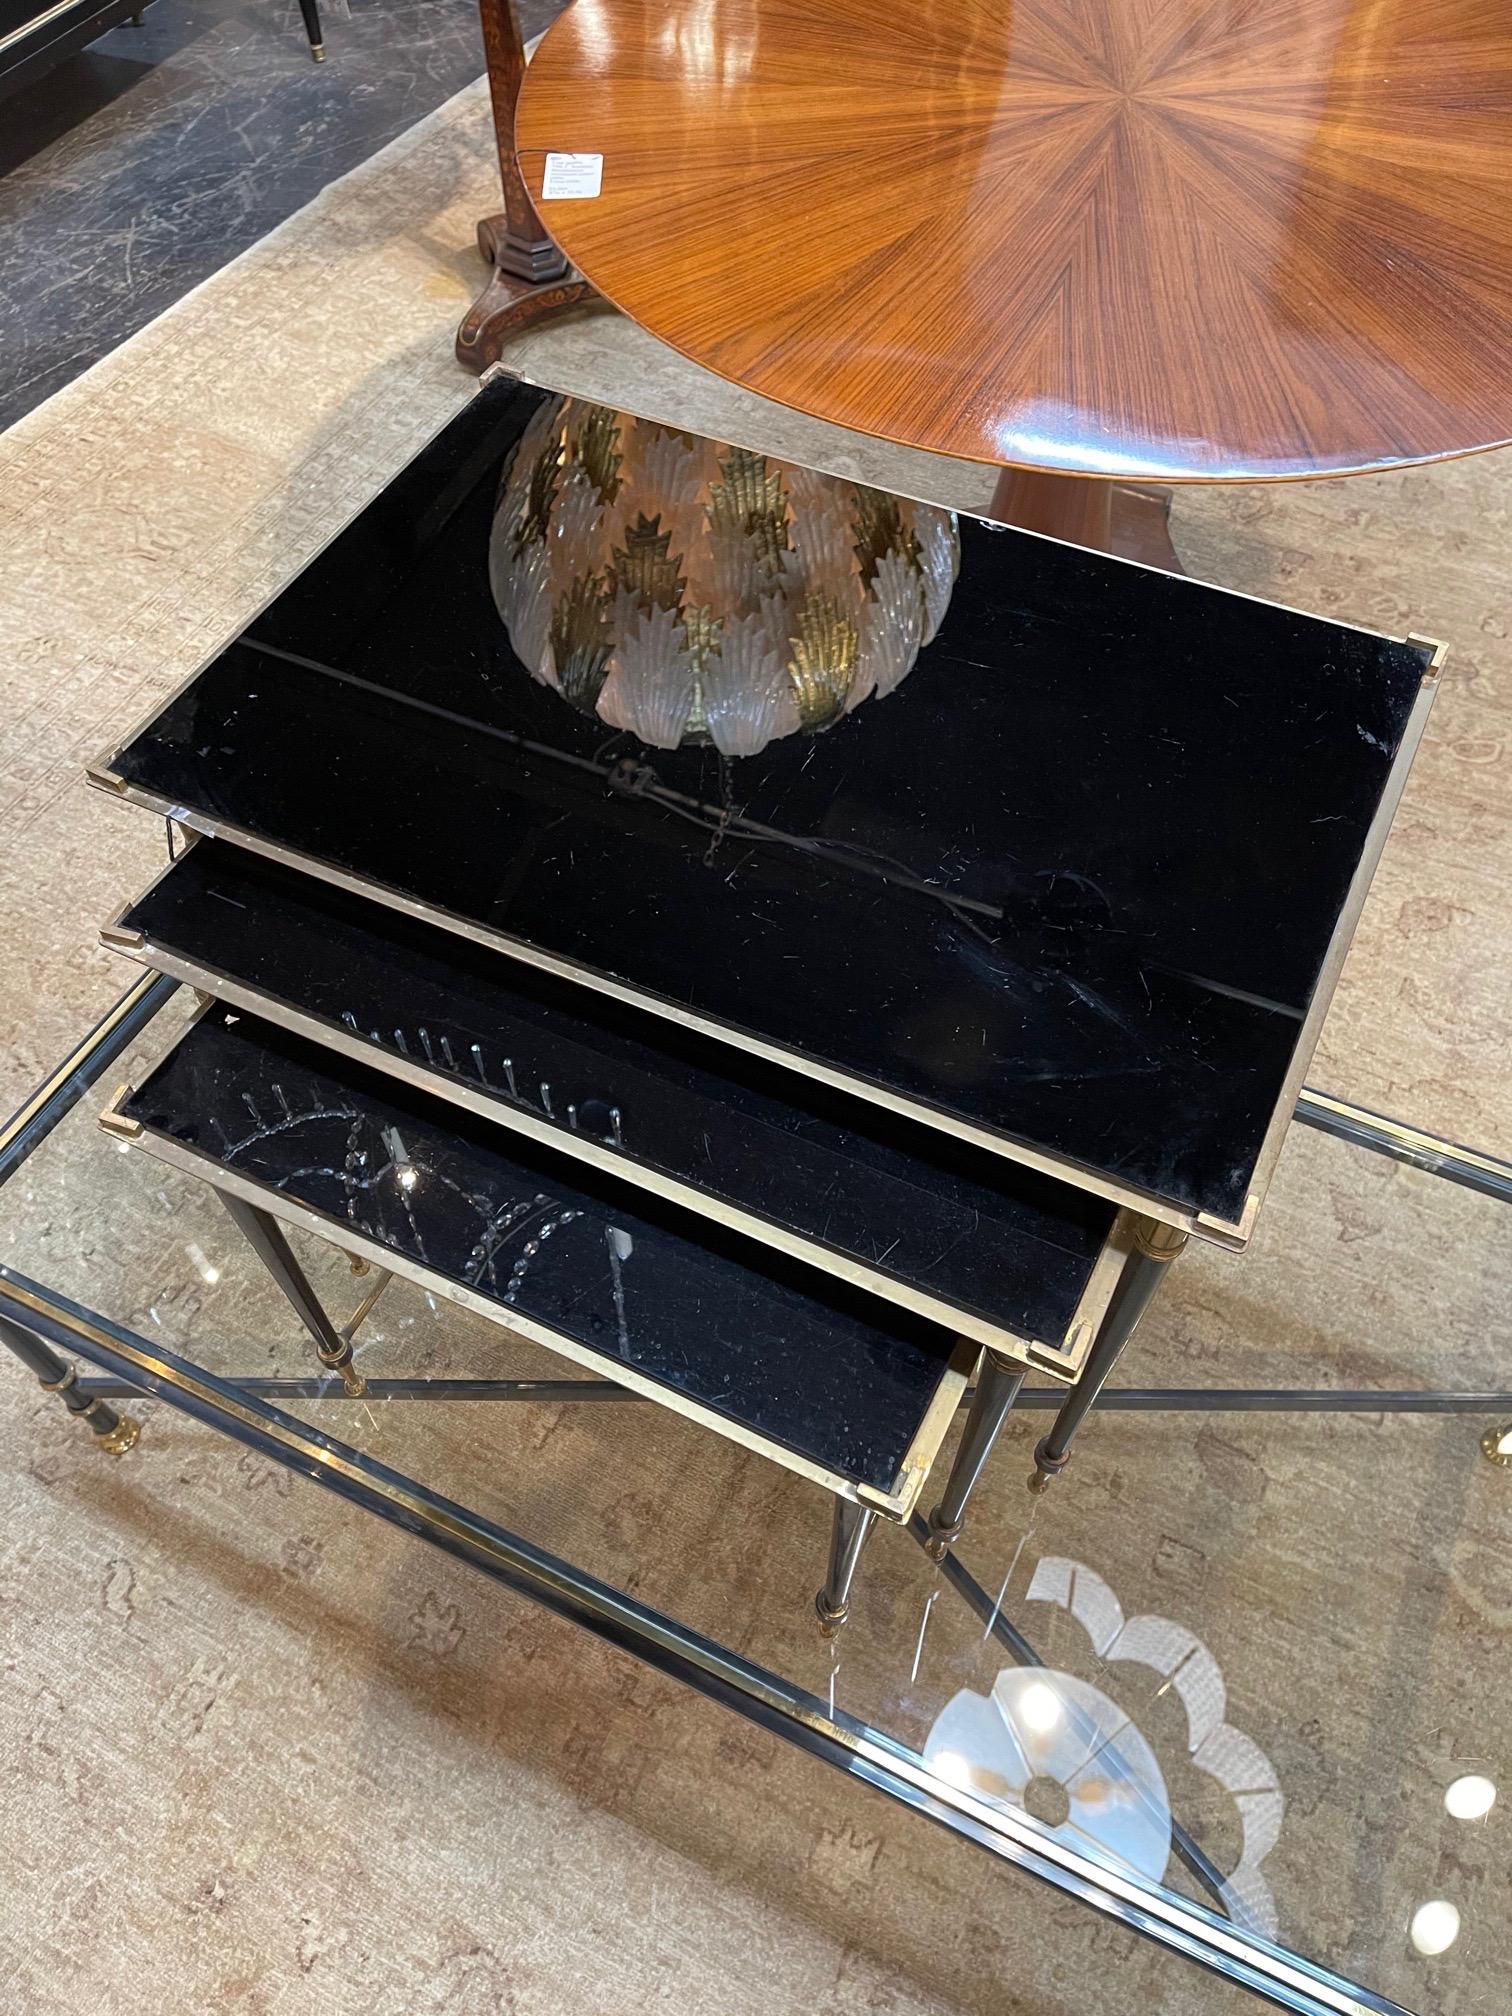 Elegant pair of 3 midcentury brass and black glass nesting tables. Very fine quality on these. Creates a Classic look!